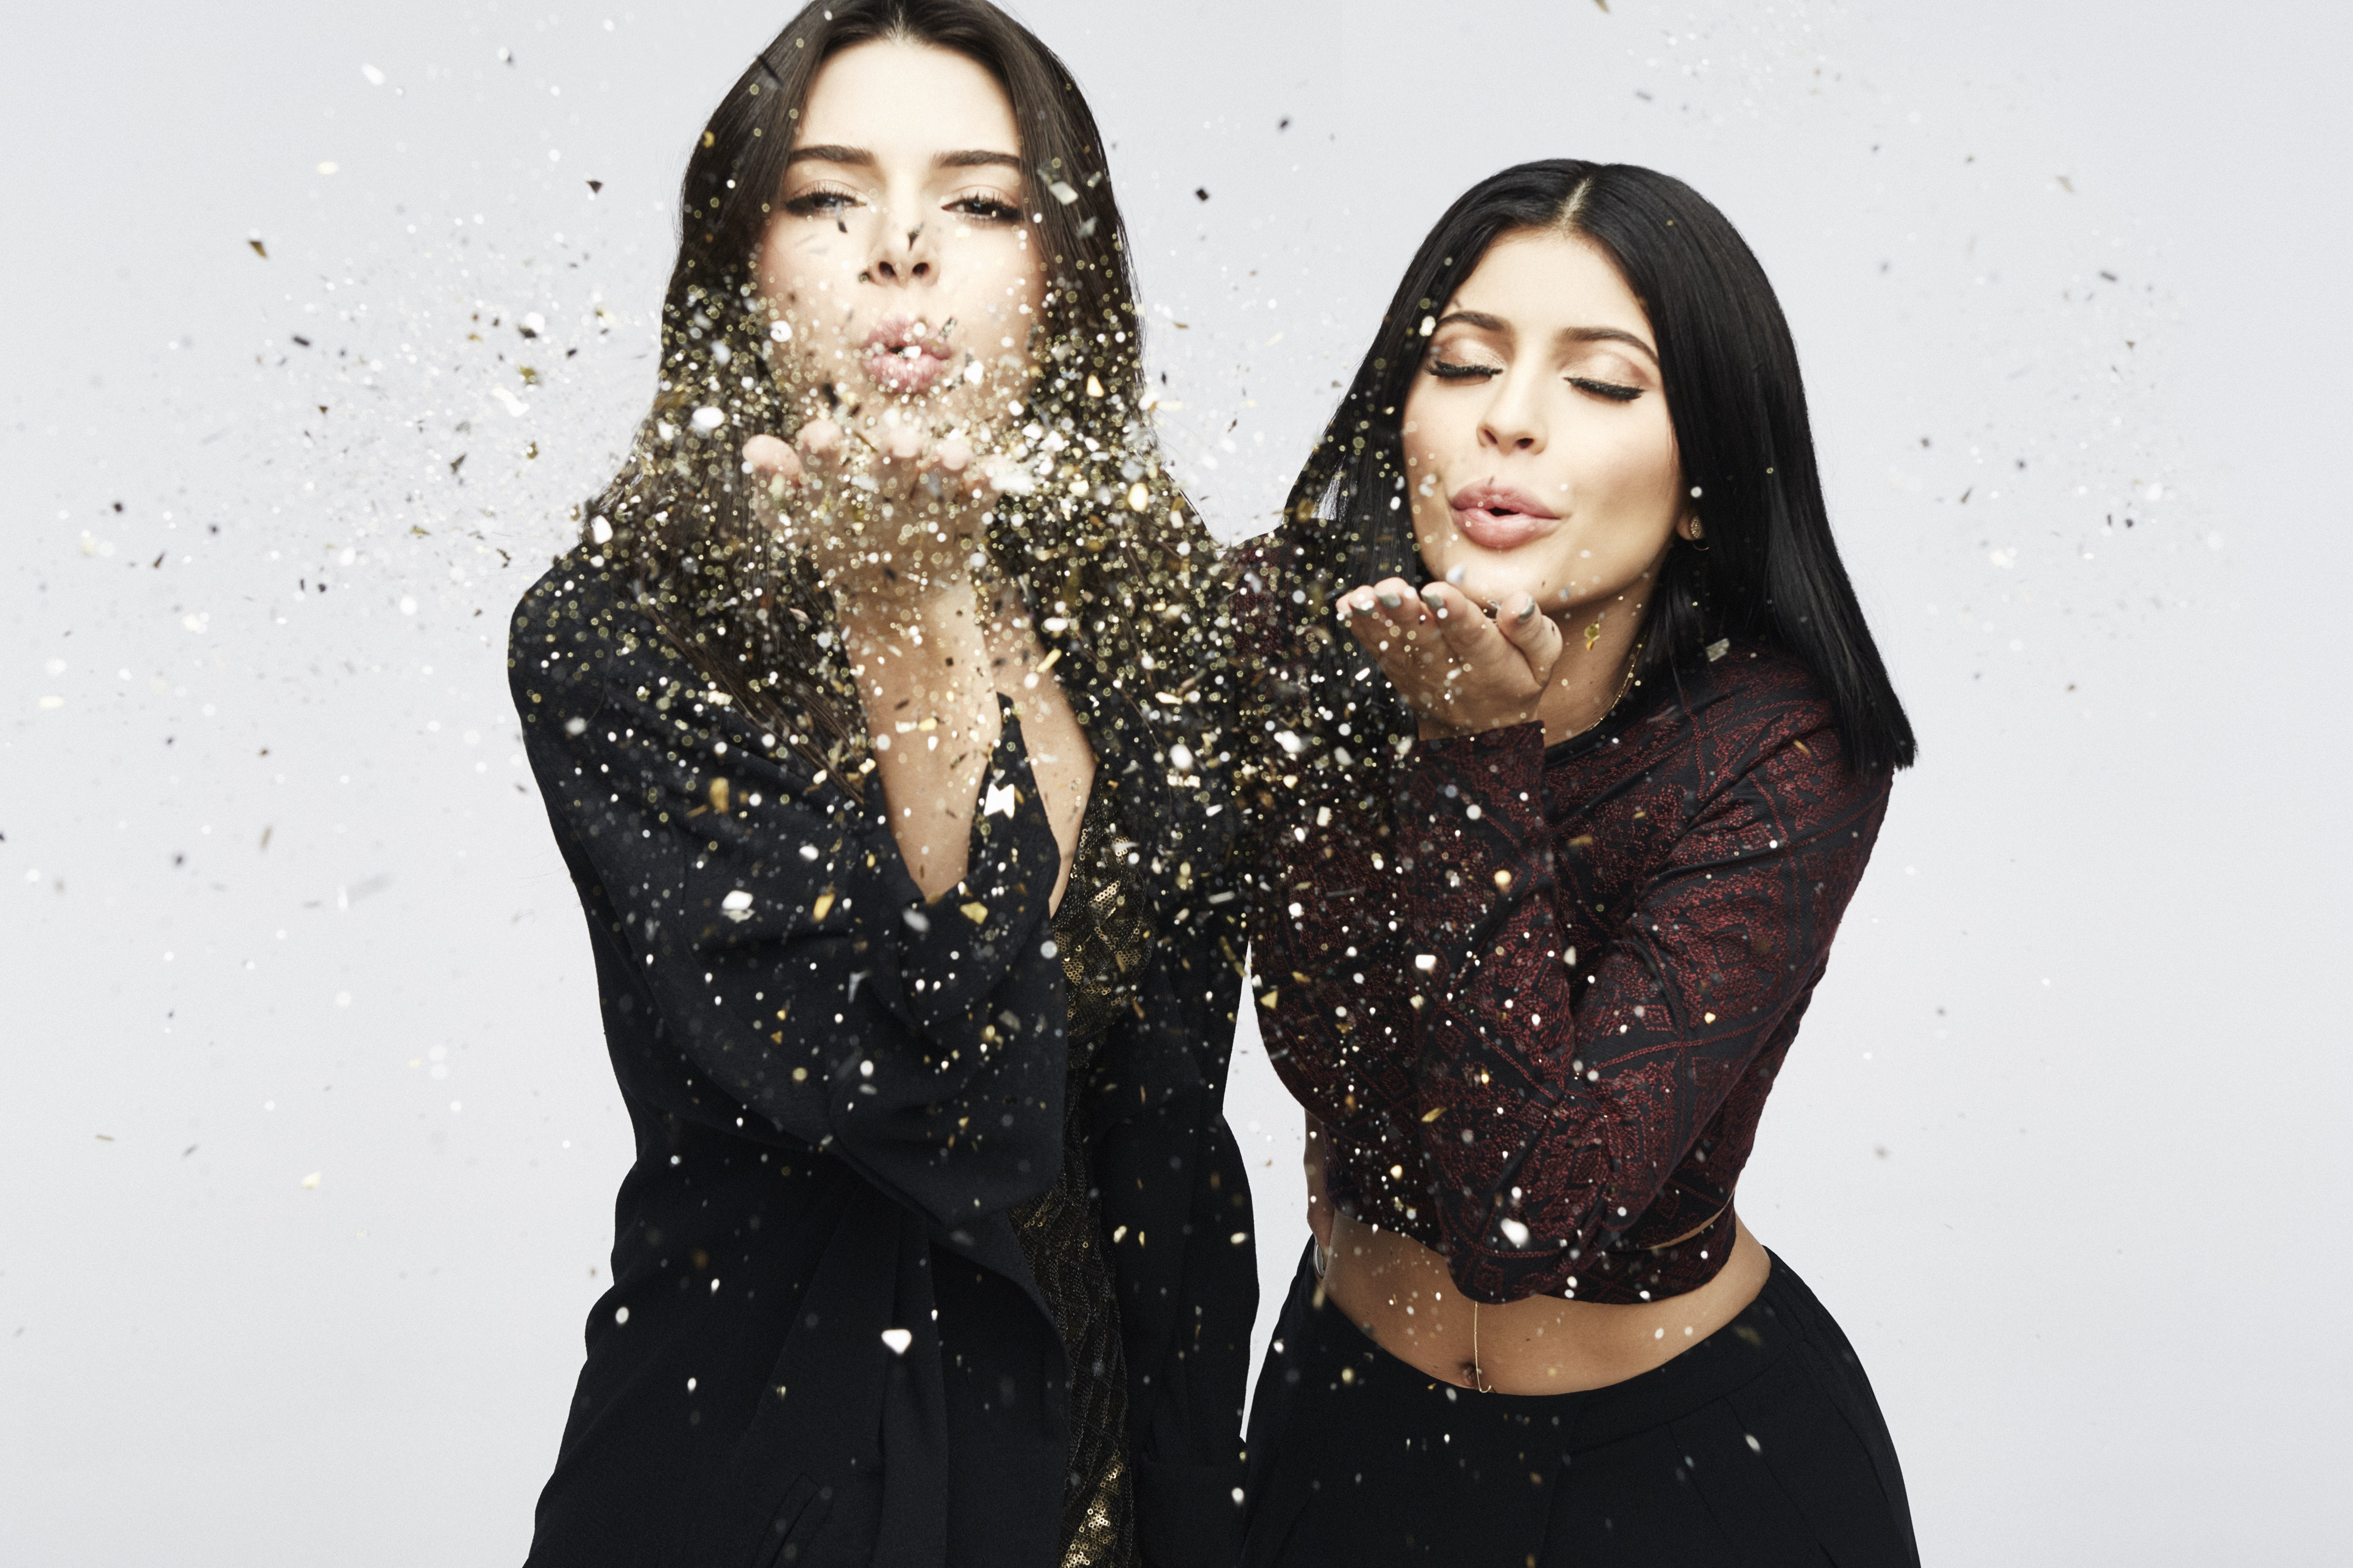 Kylie Jenner And Kendall Jenner Wallpapers